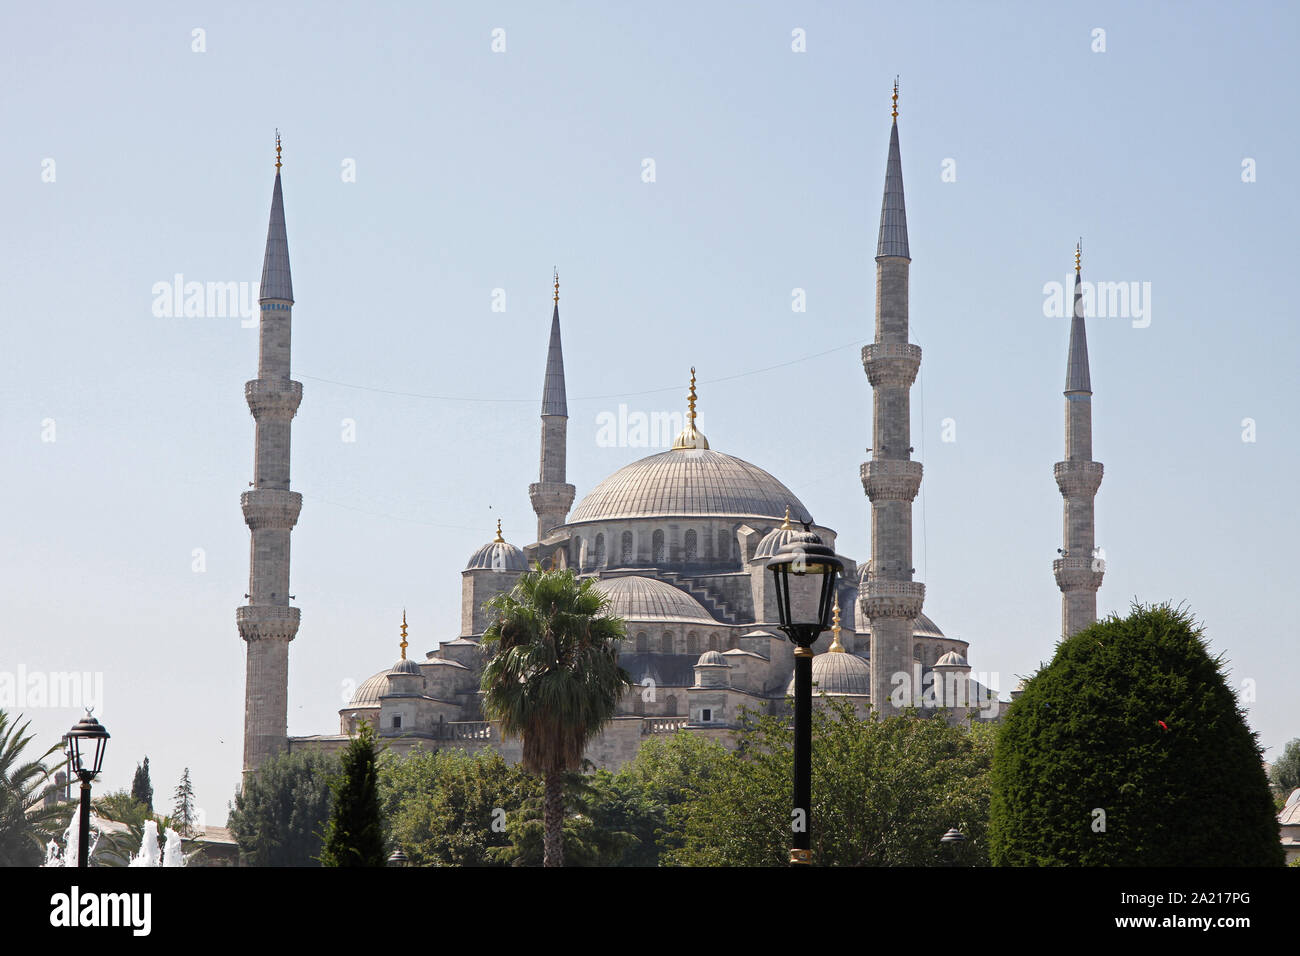 The Sultan Ahmed Mosque AKA Blue Mosque, Fatih, Istanbul, Turkey. Stock Photo